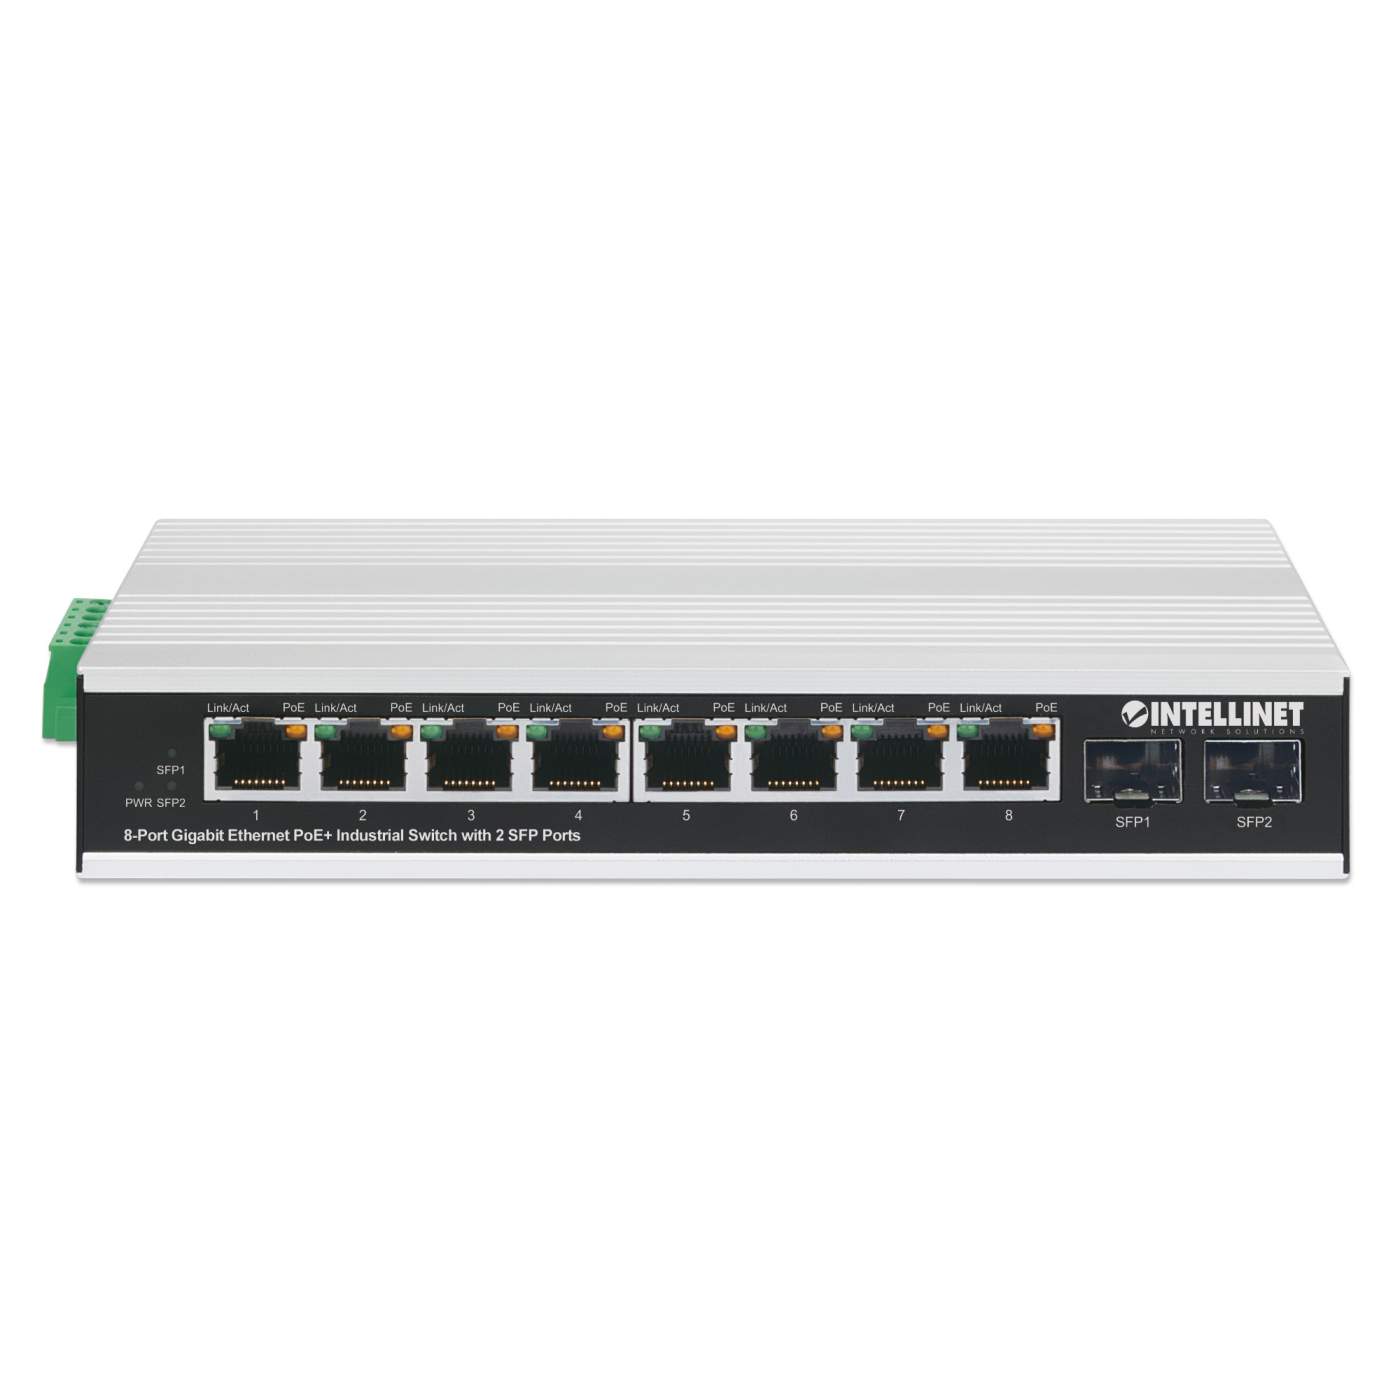 Industrial 8-Port Gigabit Ethernet PoE+ Switch with 2 SFP Ports Image 4